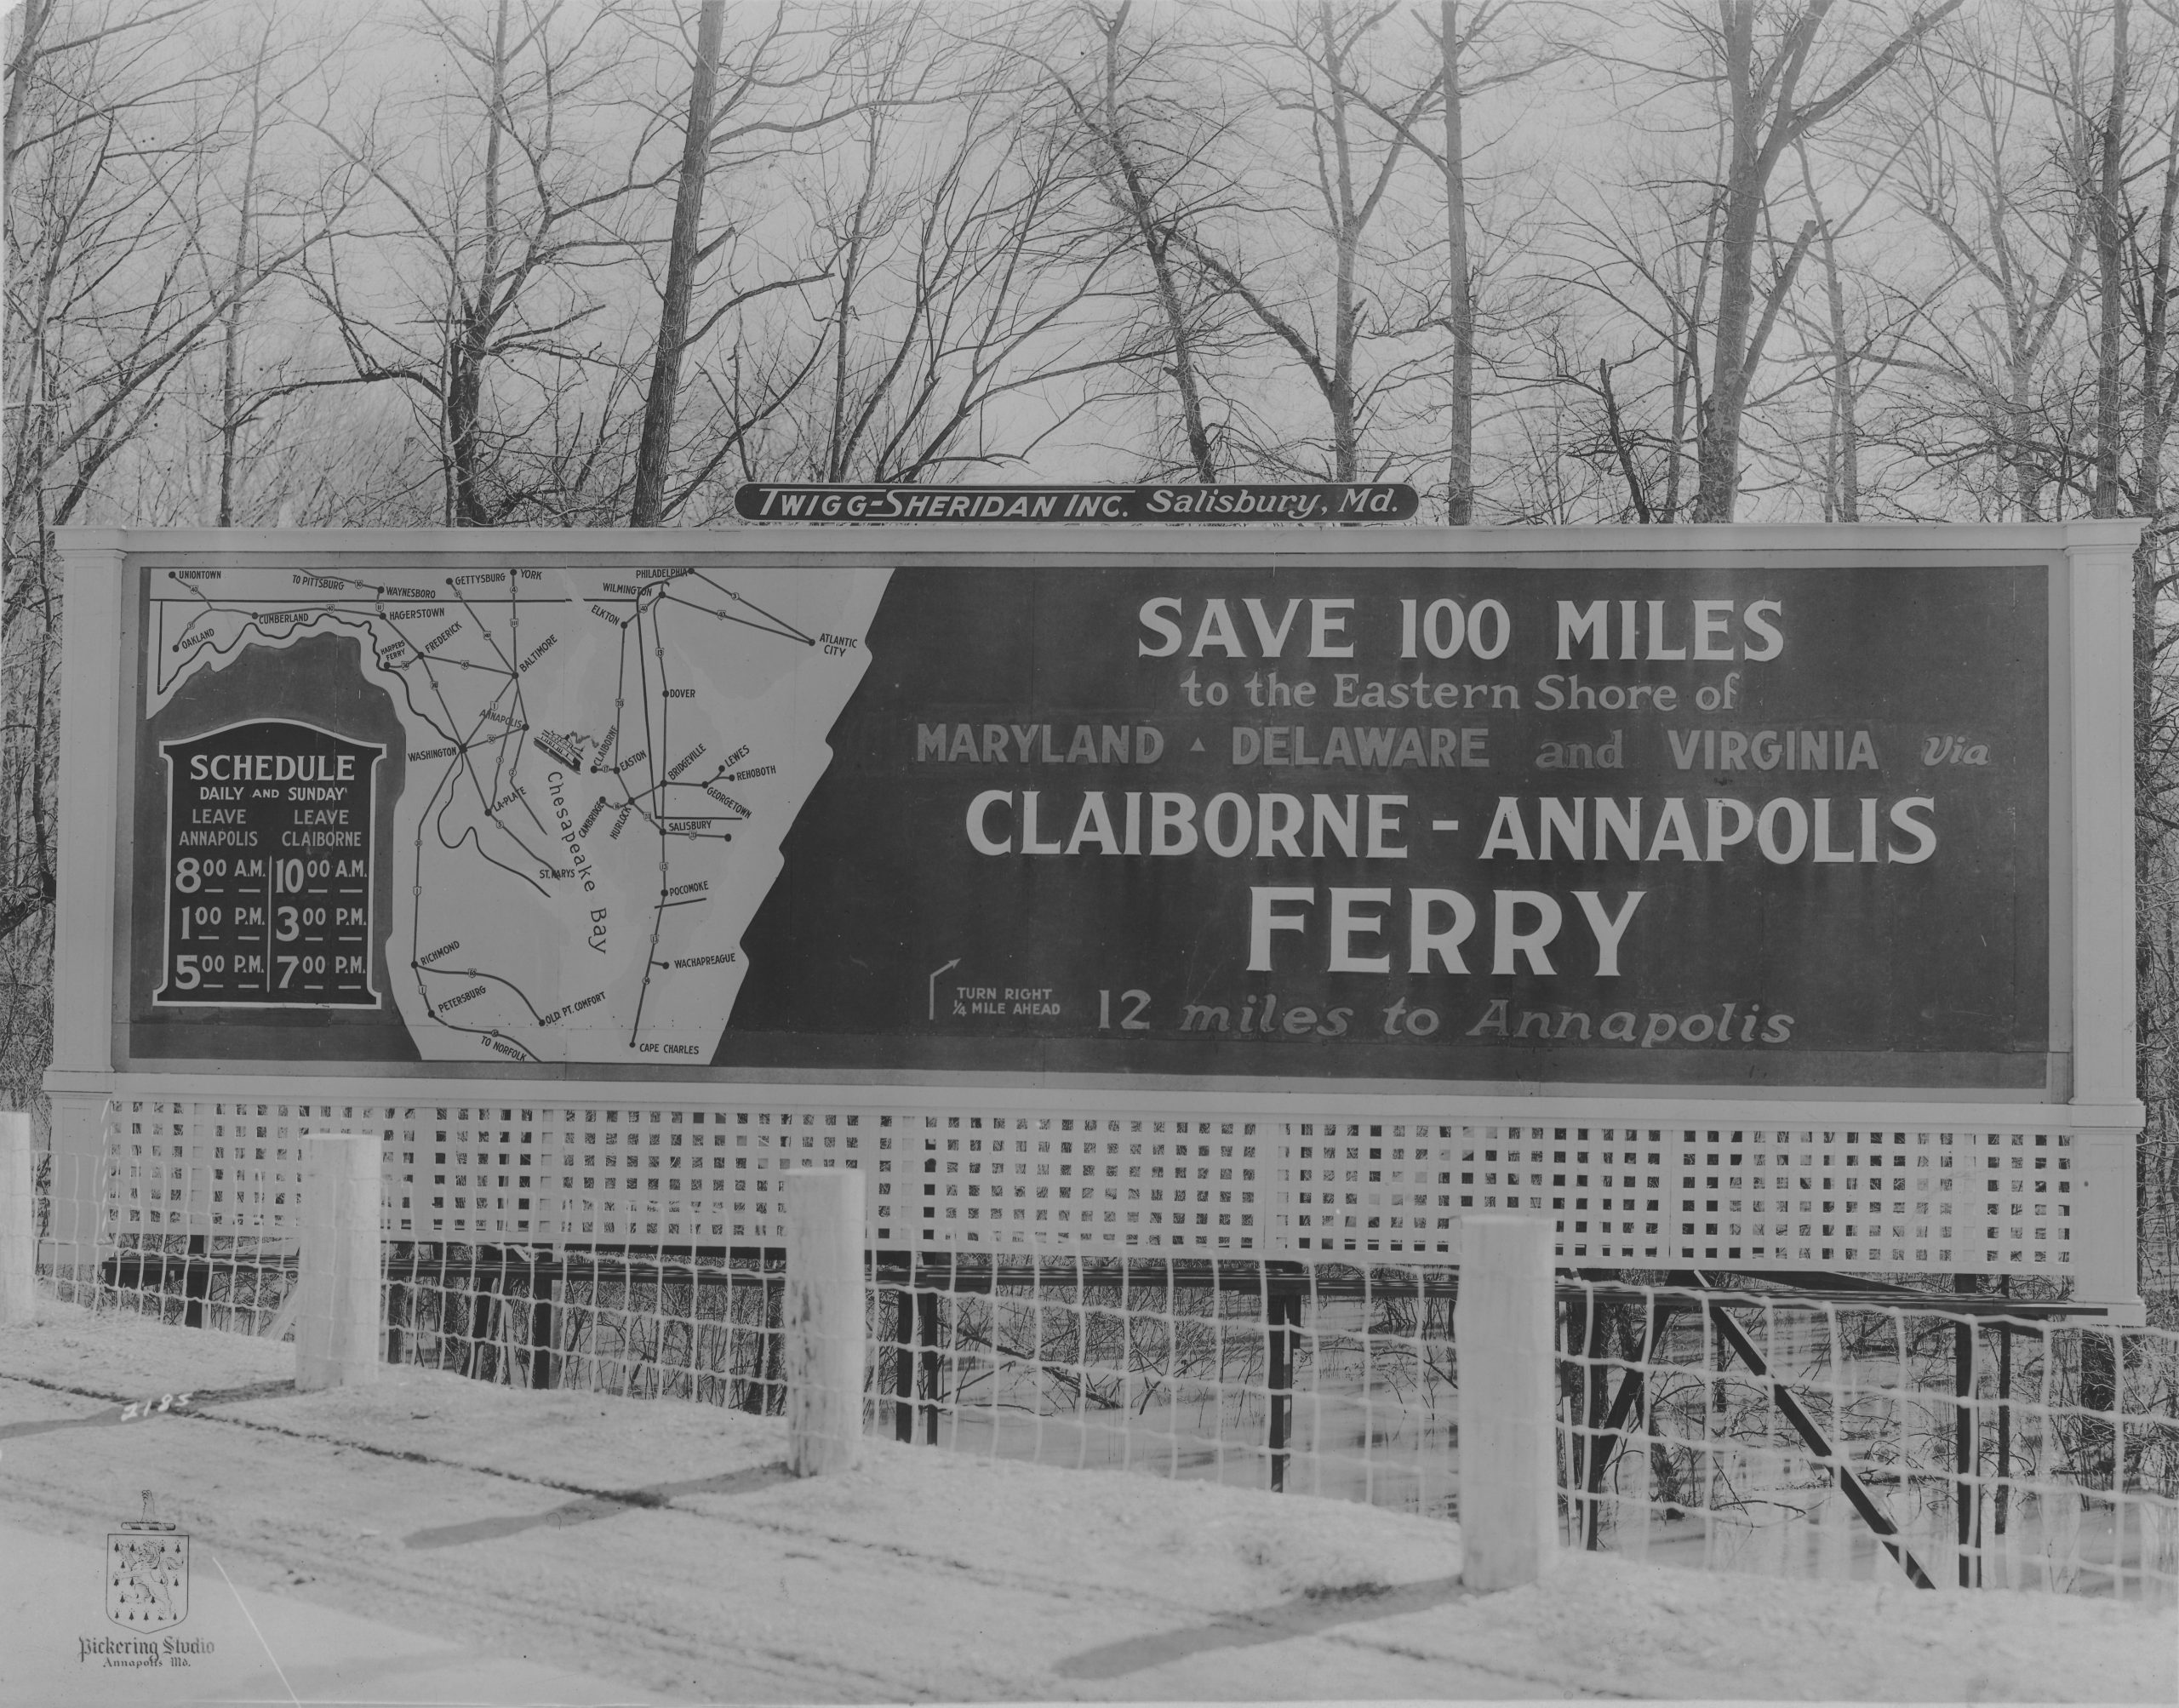 Photograph of sign advertising Claiborne-Annapolis Ferry by Pickering Studio, c. 1926-1930. Collection of the Chesapeake Bay Maritime Museum, 0899.0008